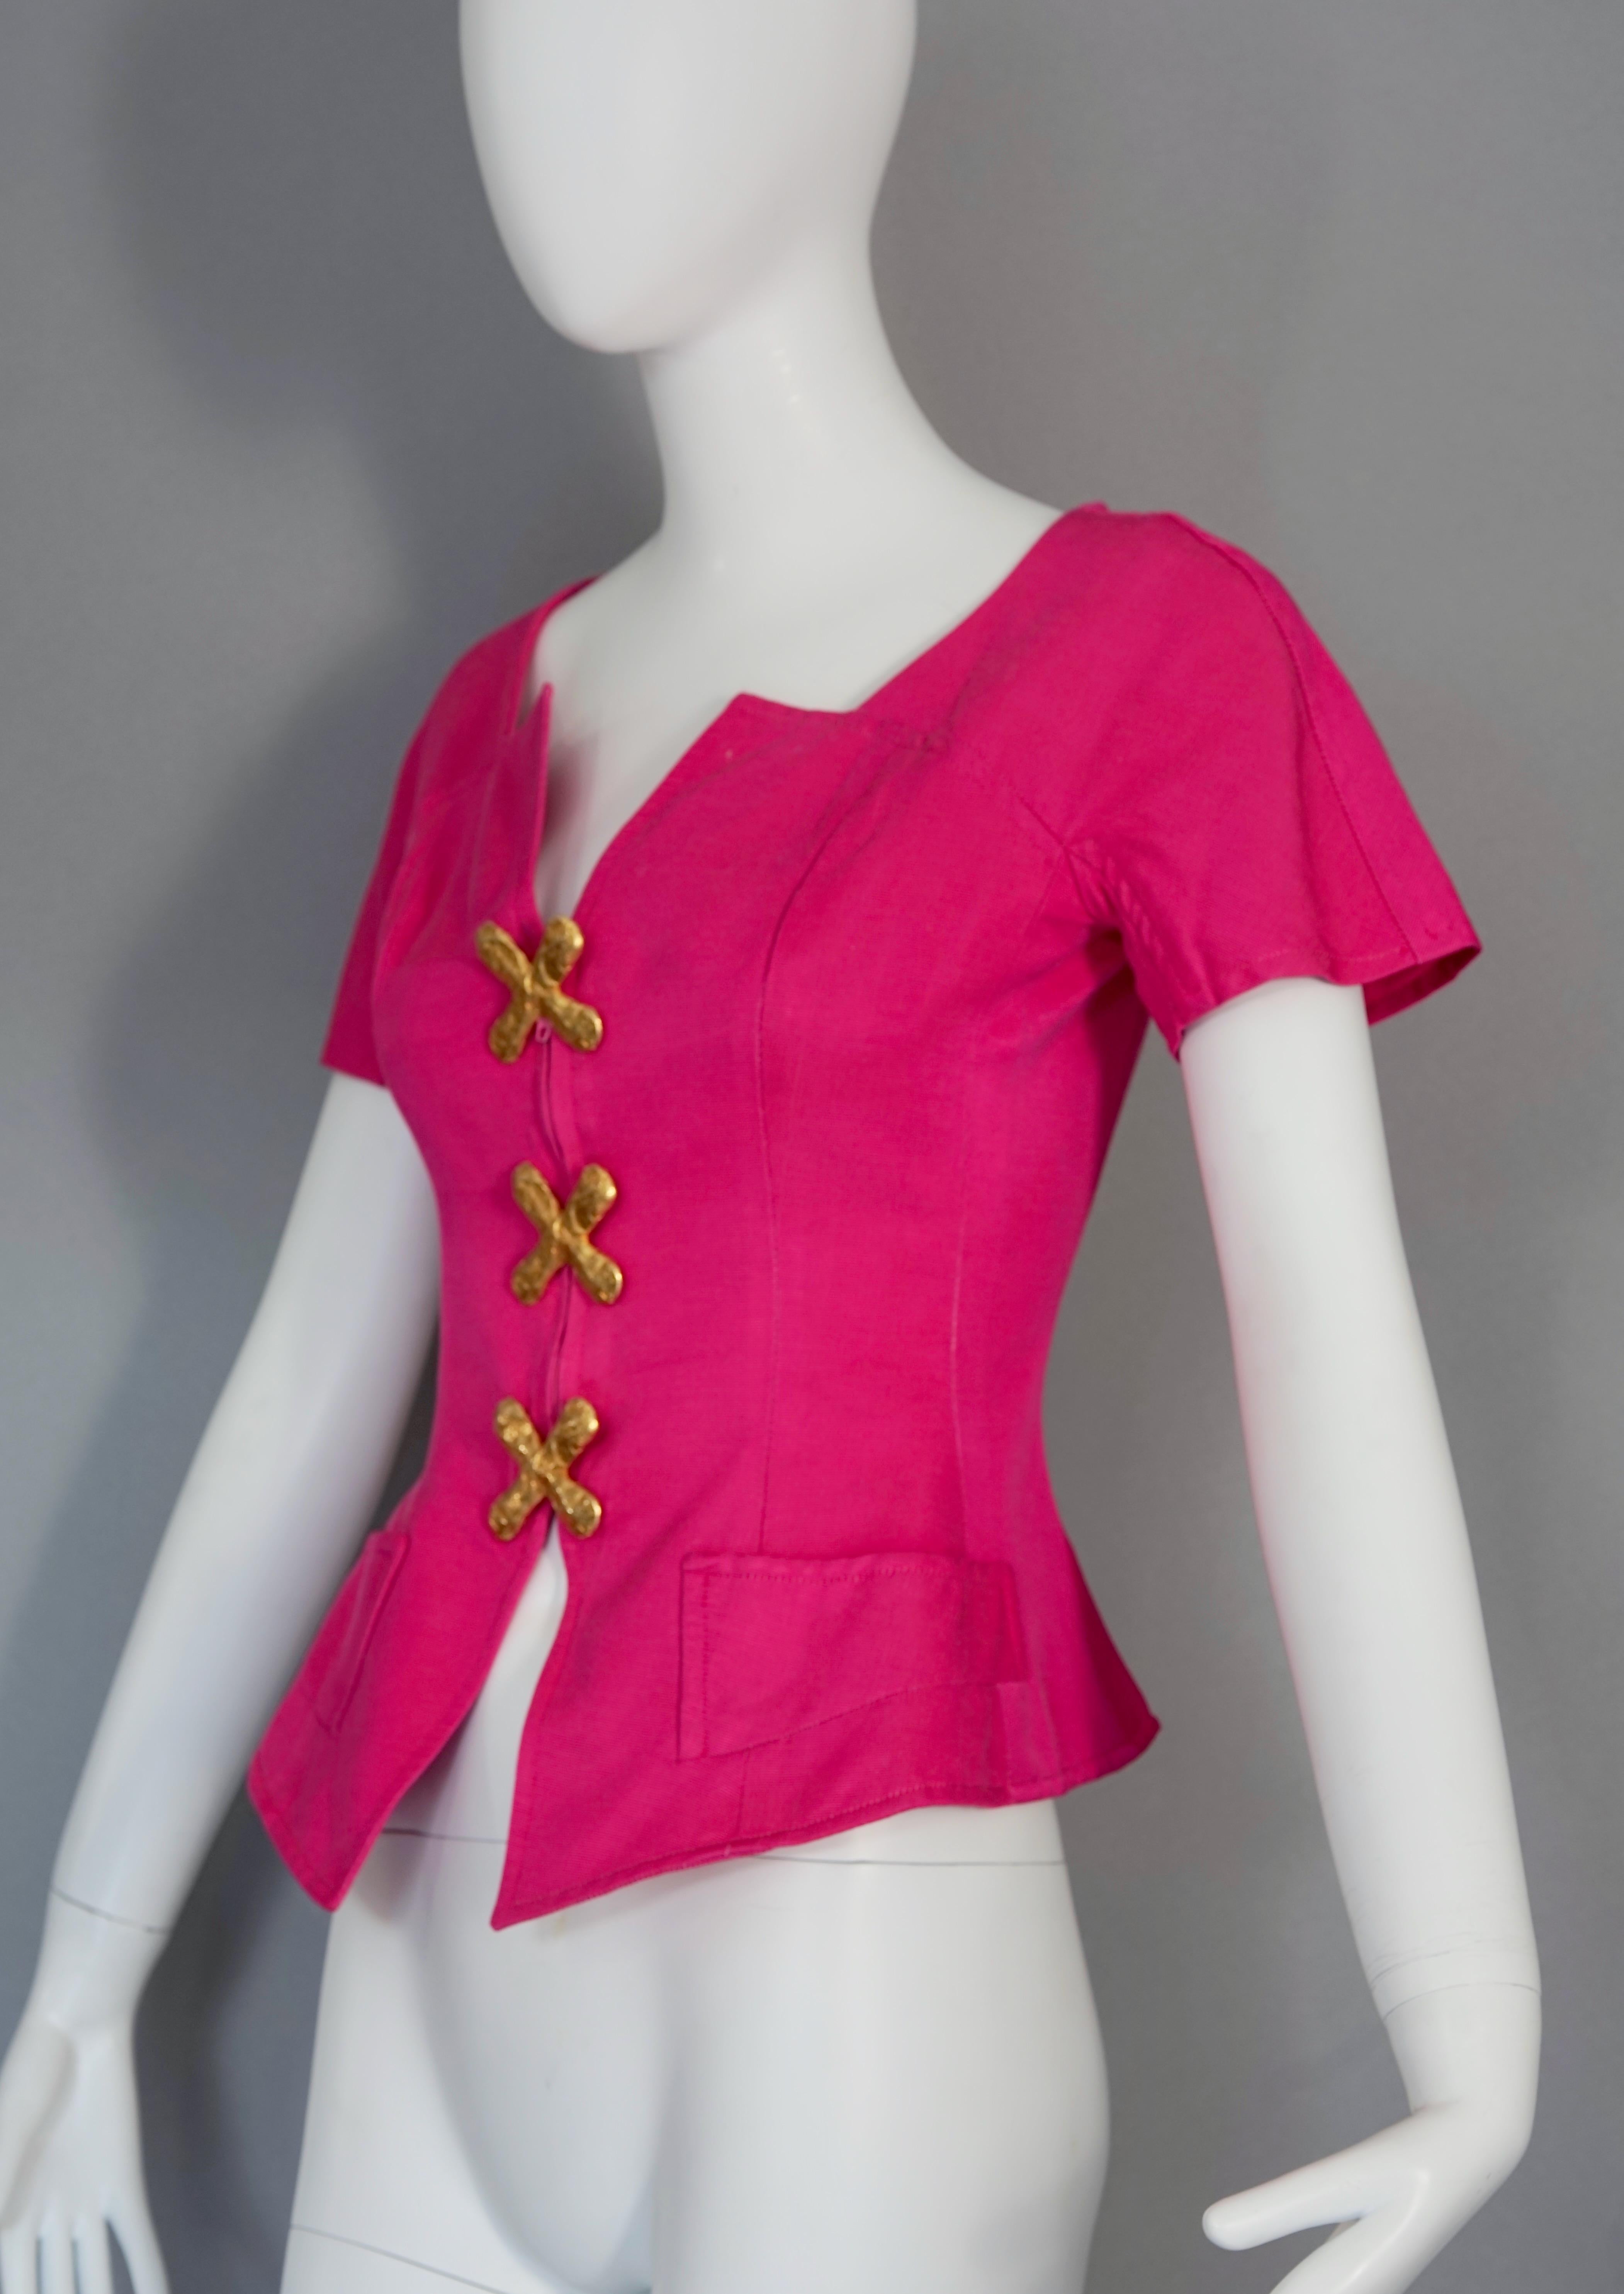 Vintage CRISTIAN LACROIX Jewelled Fuchsia Pink Blouse Top In Good Condition For Sale In Kingersheim, Alsace